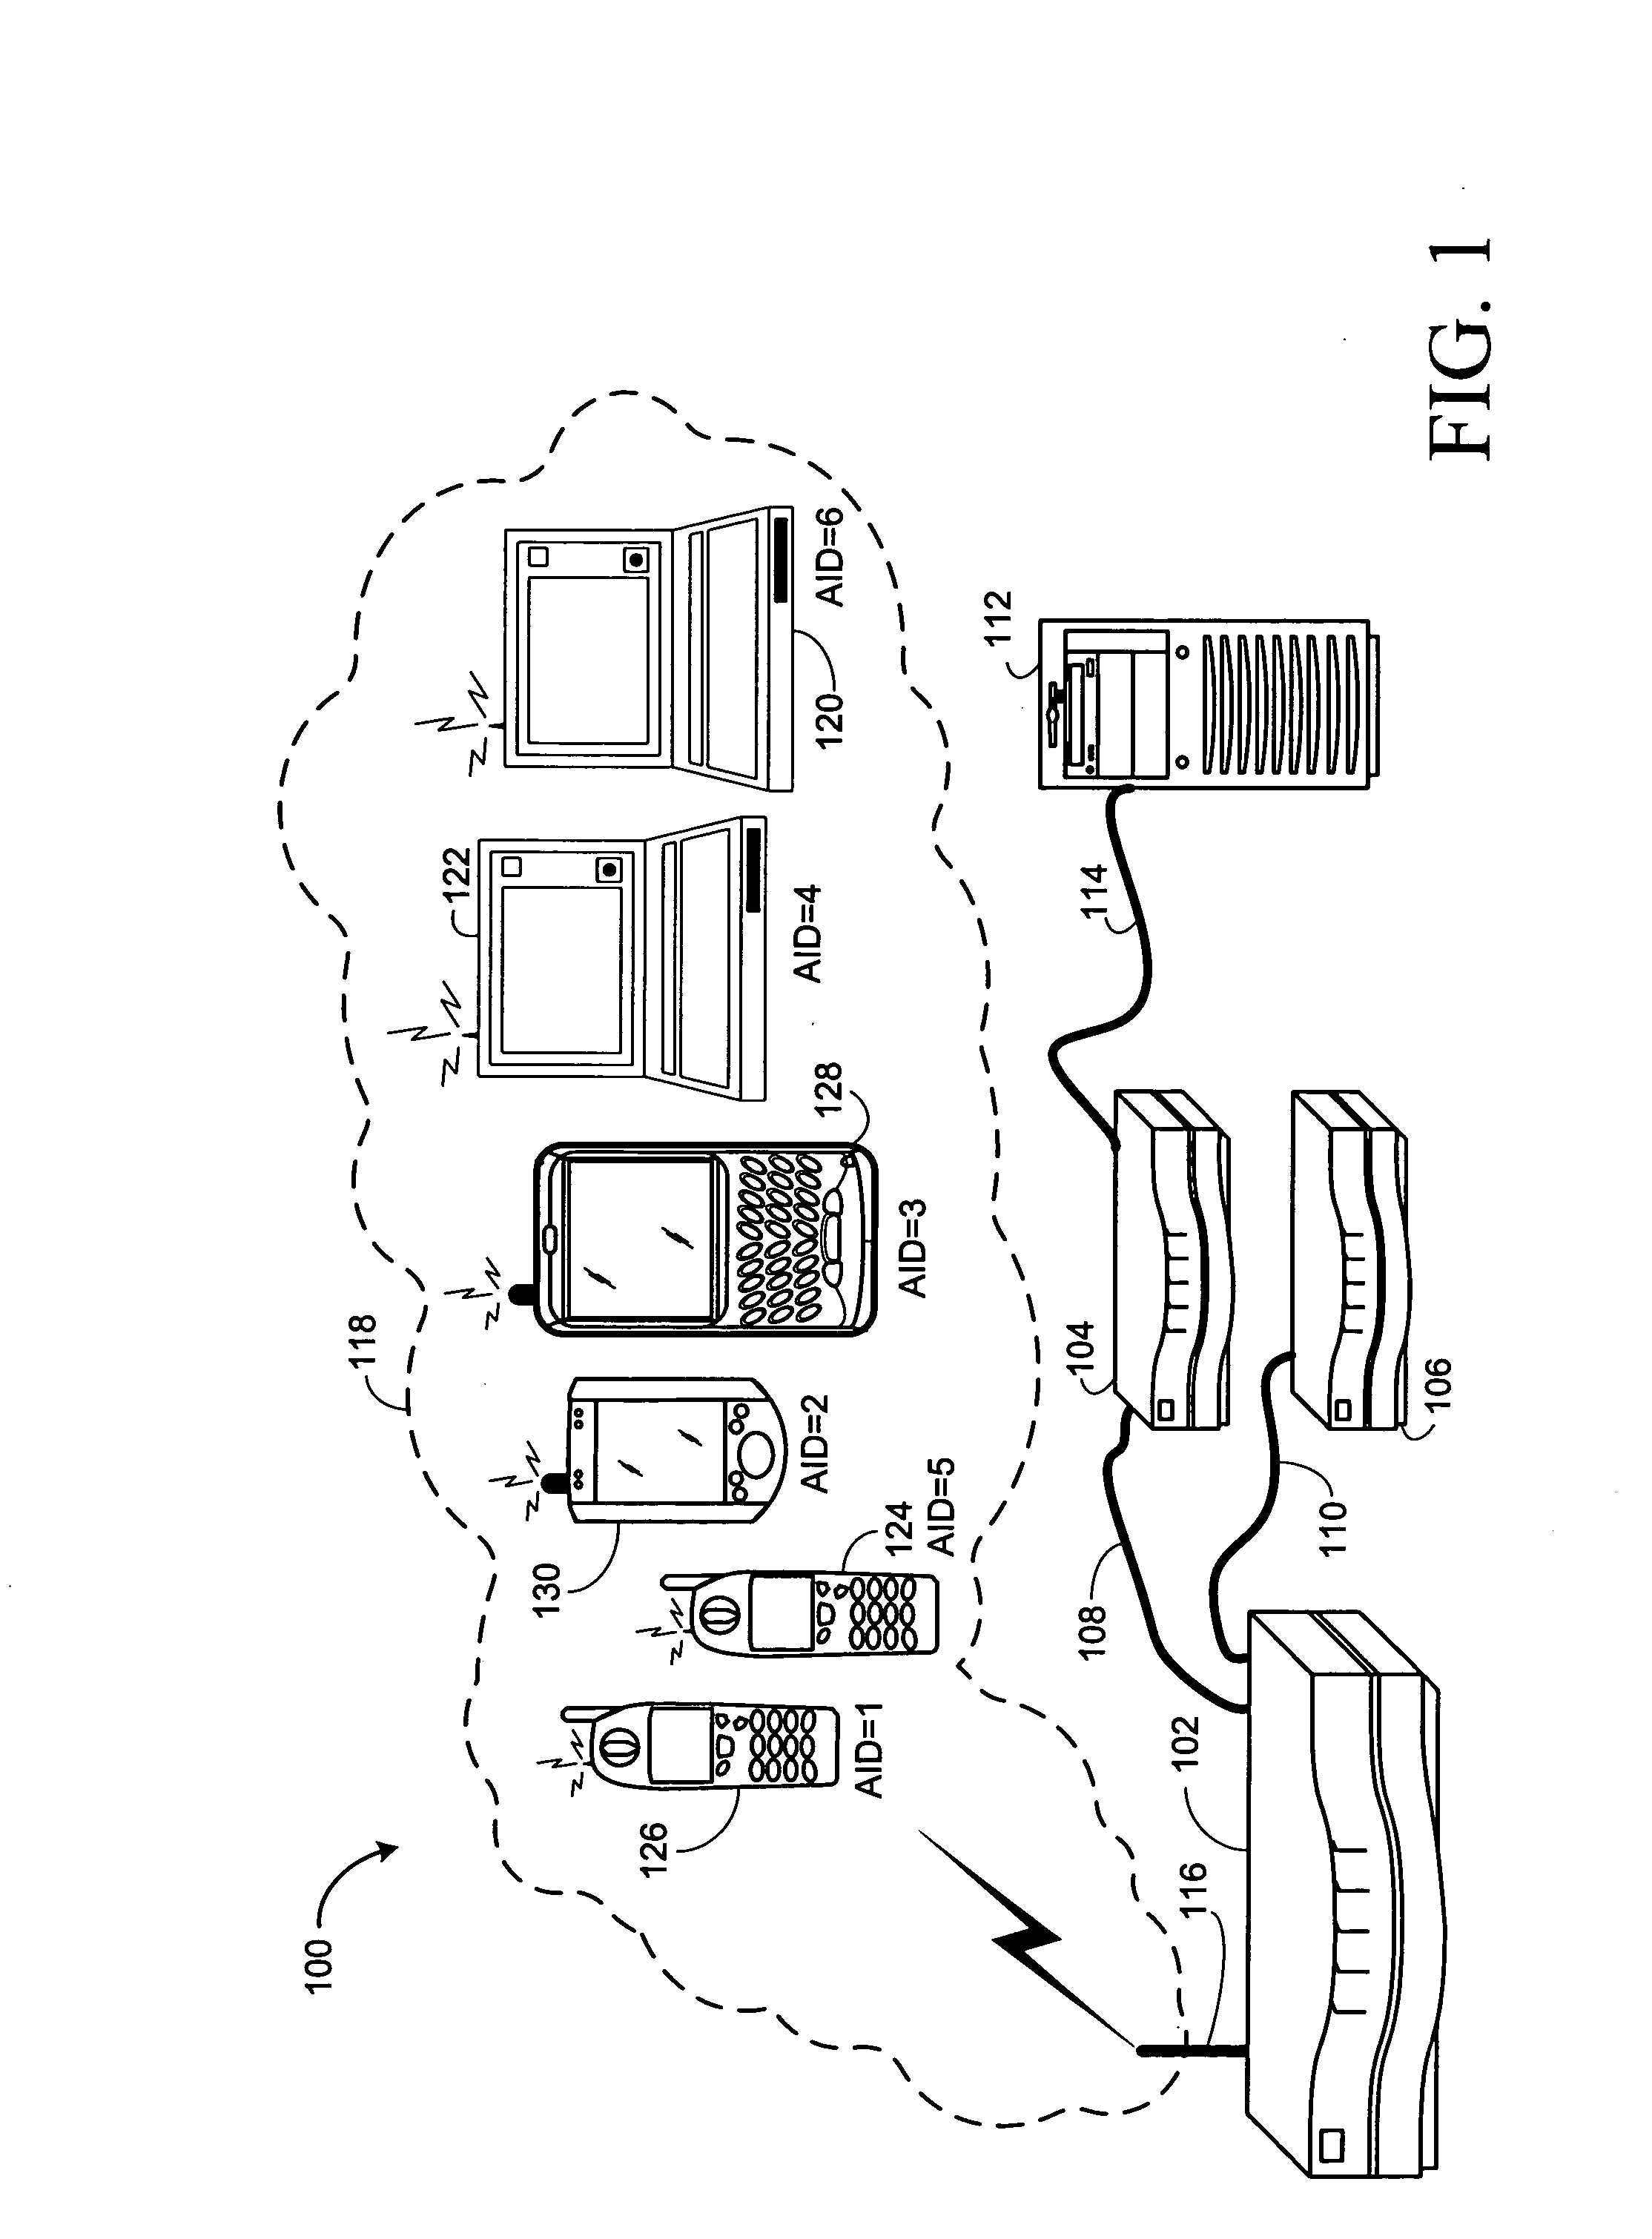 Apparatus and methods for delivery handling broadcast and multicast traffic as unicast traffic in a wireless network